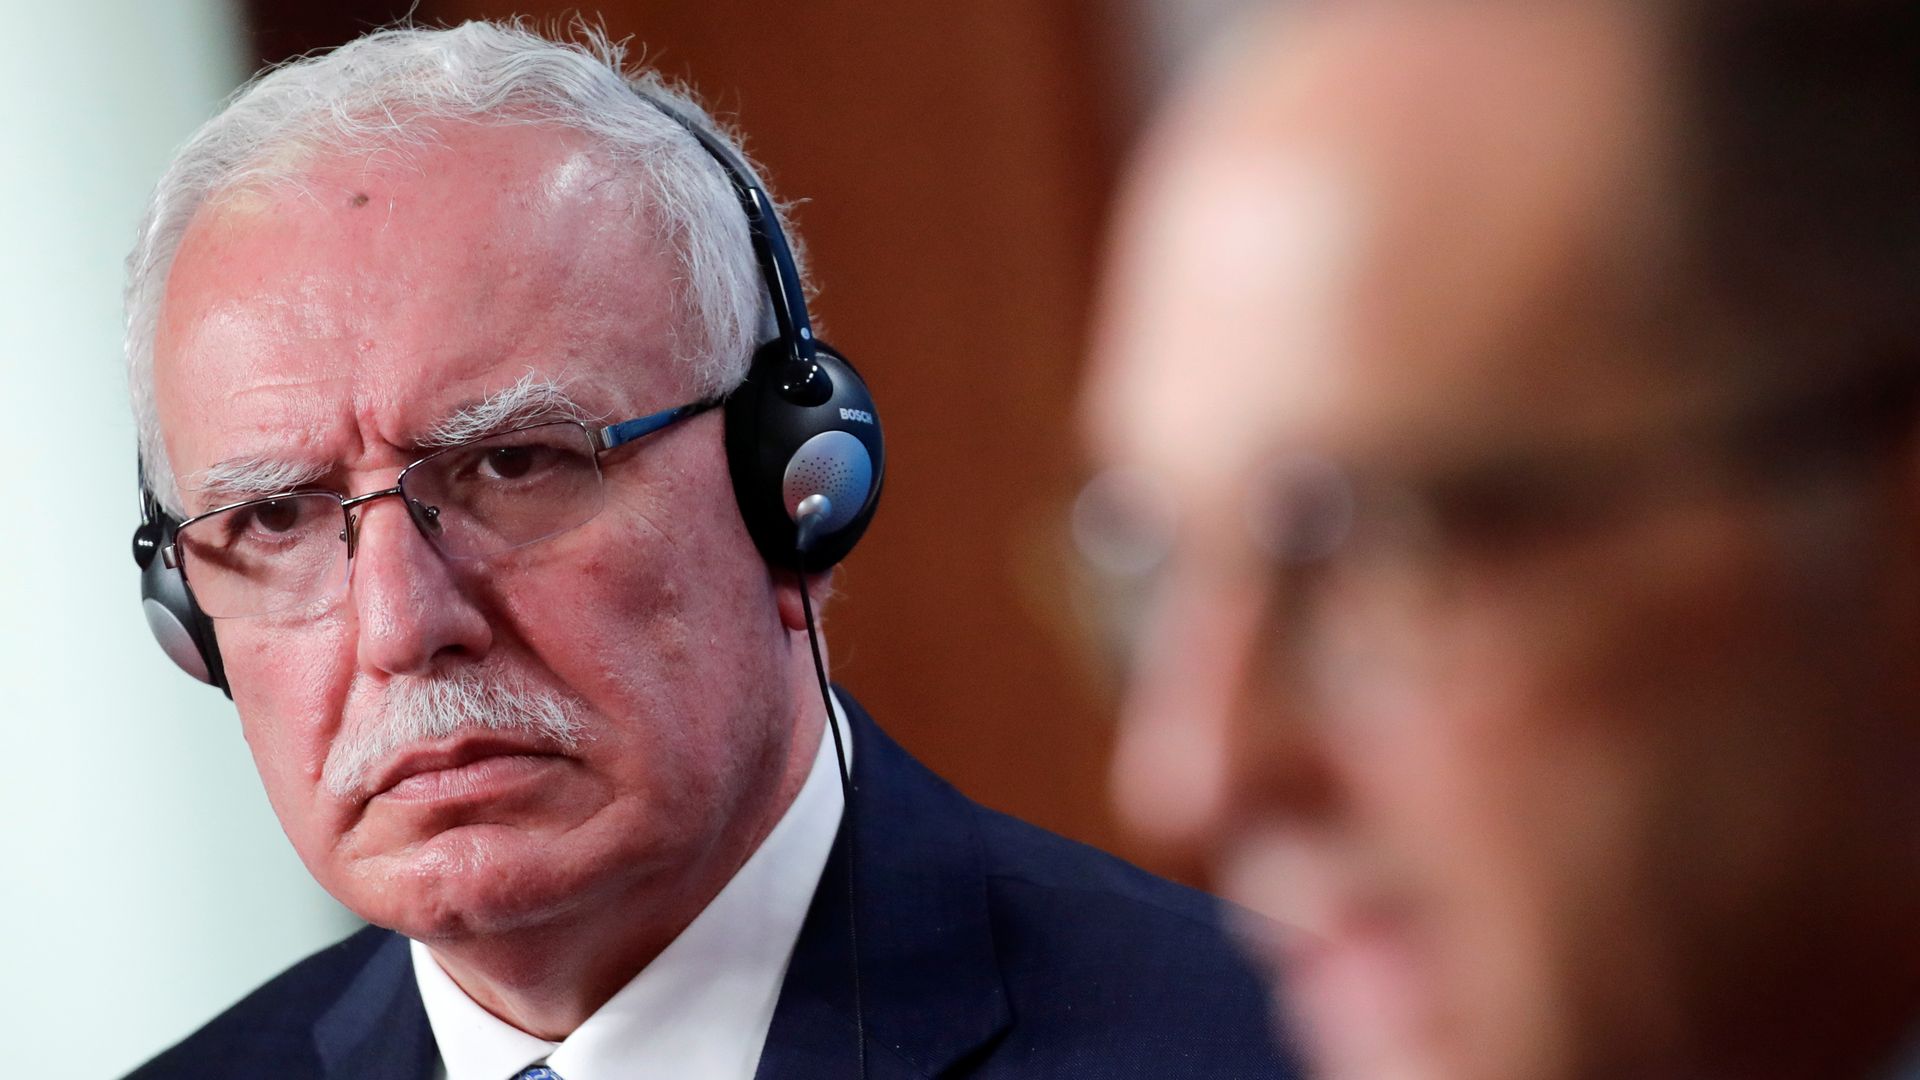 Palestinian Foreign Minister Riyad al-Maliki is seen listening during a news conference.